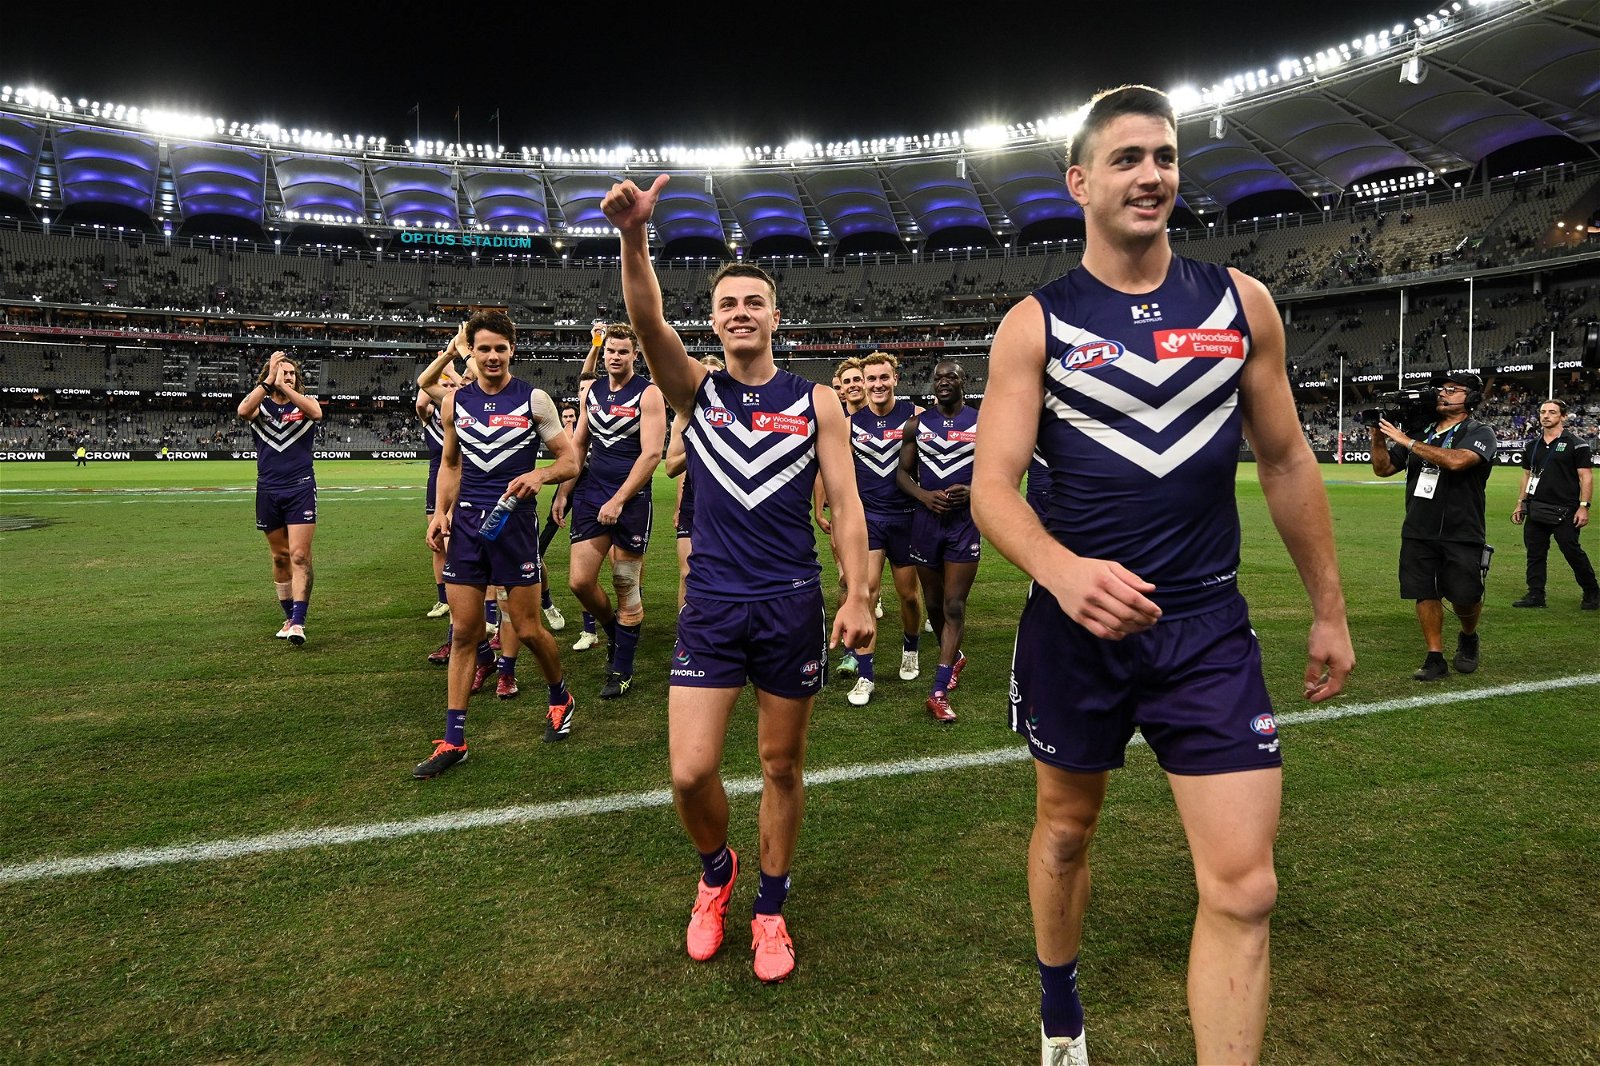 Cooper Simpson and Patrick Voss lead the Dockers off the ground after a win over the Bulldogs.